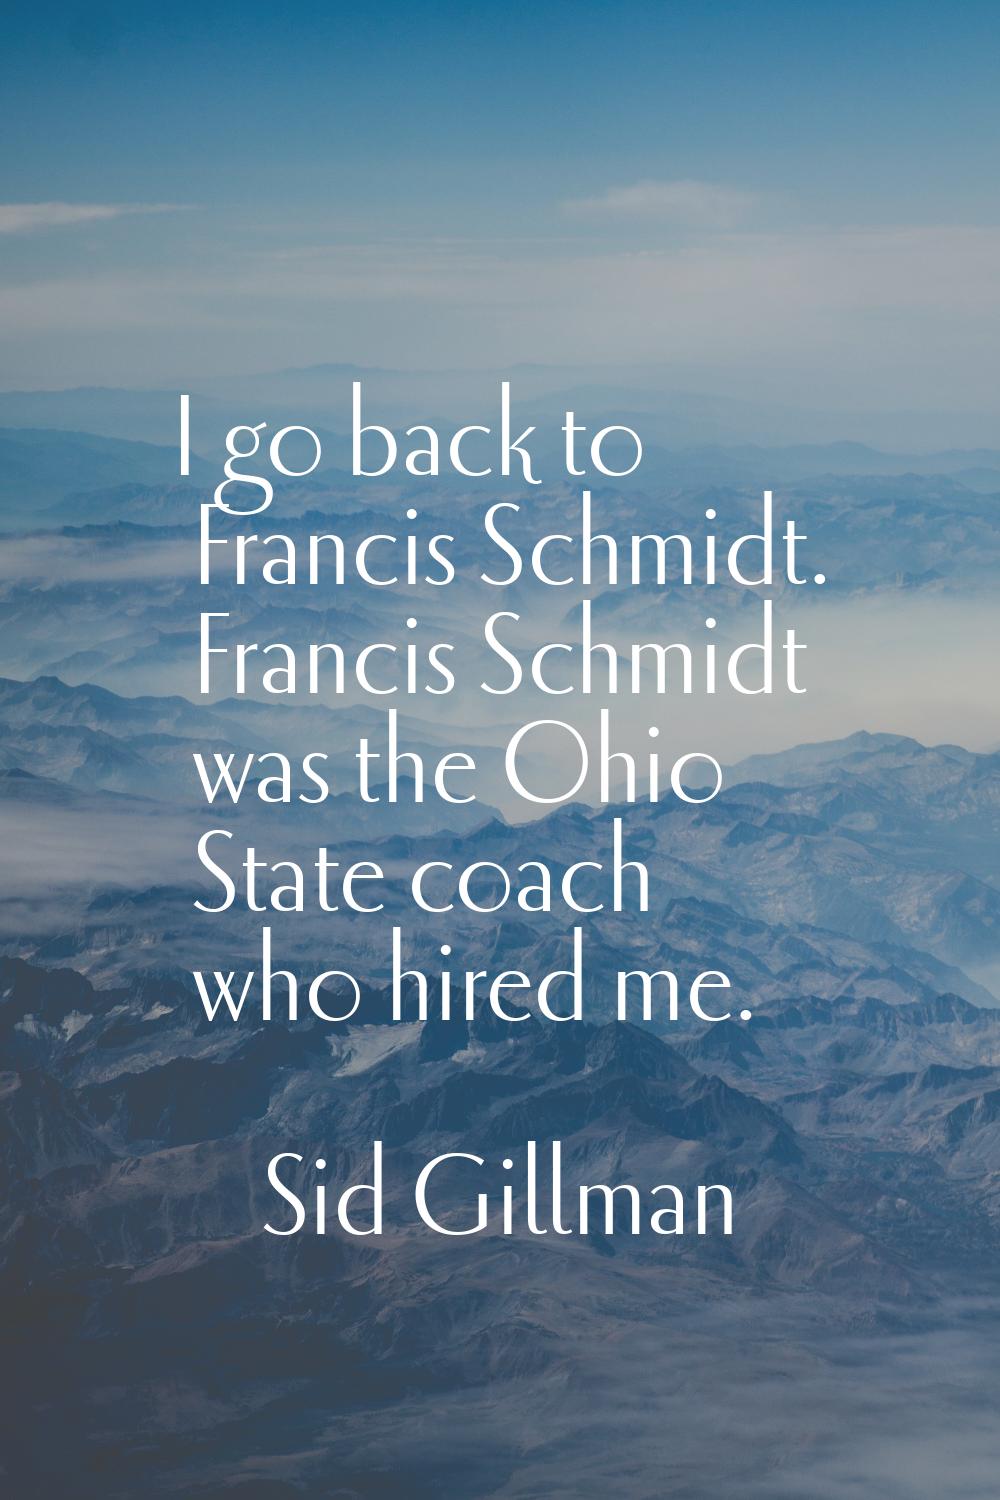 I go back to Francis Schmidt. Francis Schmidt was the Ohio State coach who hired me.